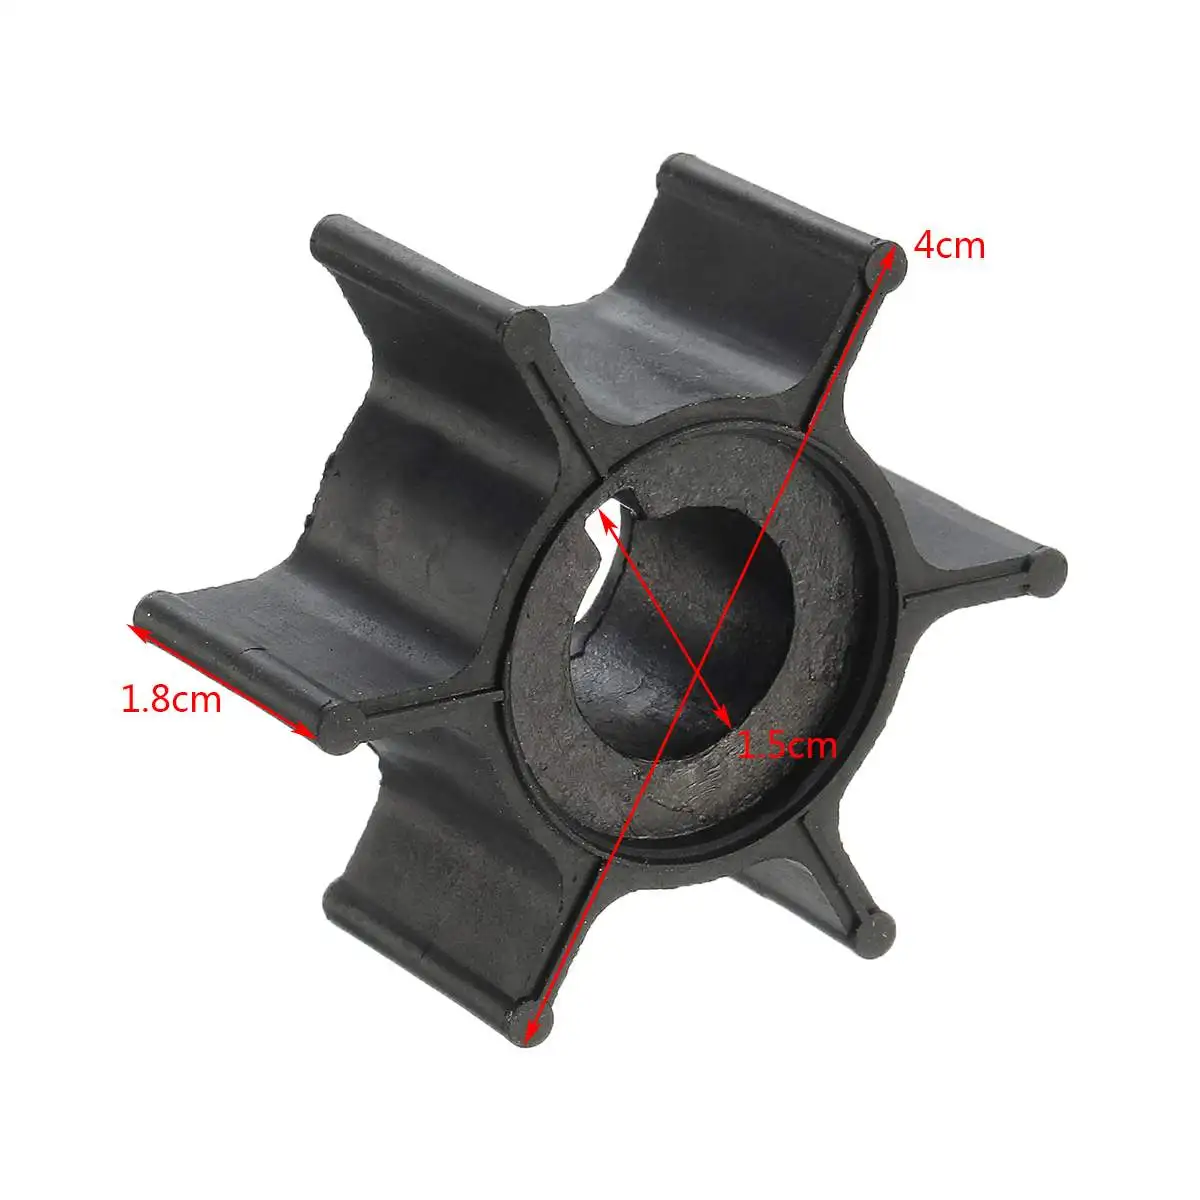 

Water Pump 6G1-44352-00 Impeller For Yamaha 6HP Outboard Boat Motor Replacement Black Rubber Diameter 4cm 6 Blades Boat Parts